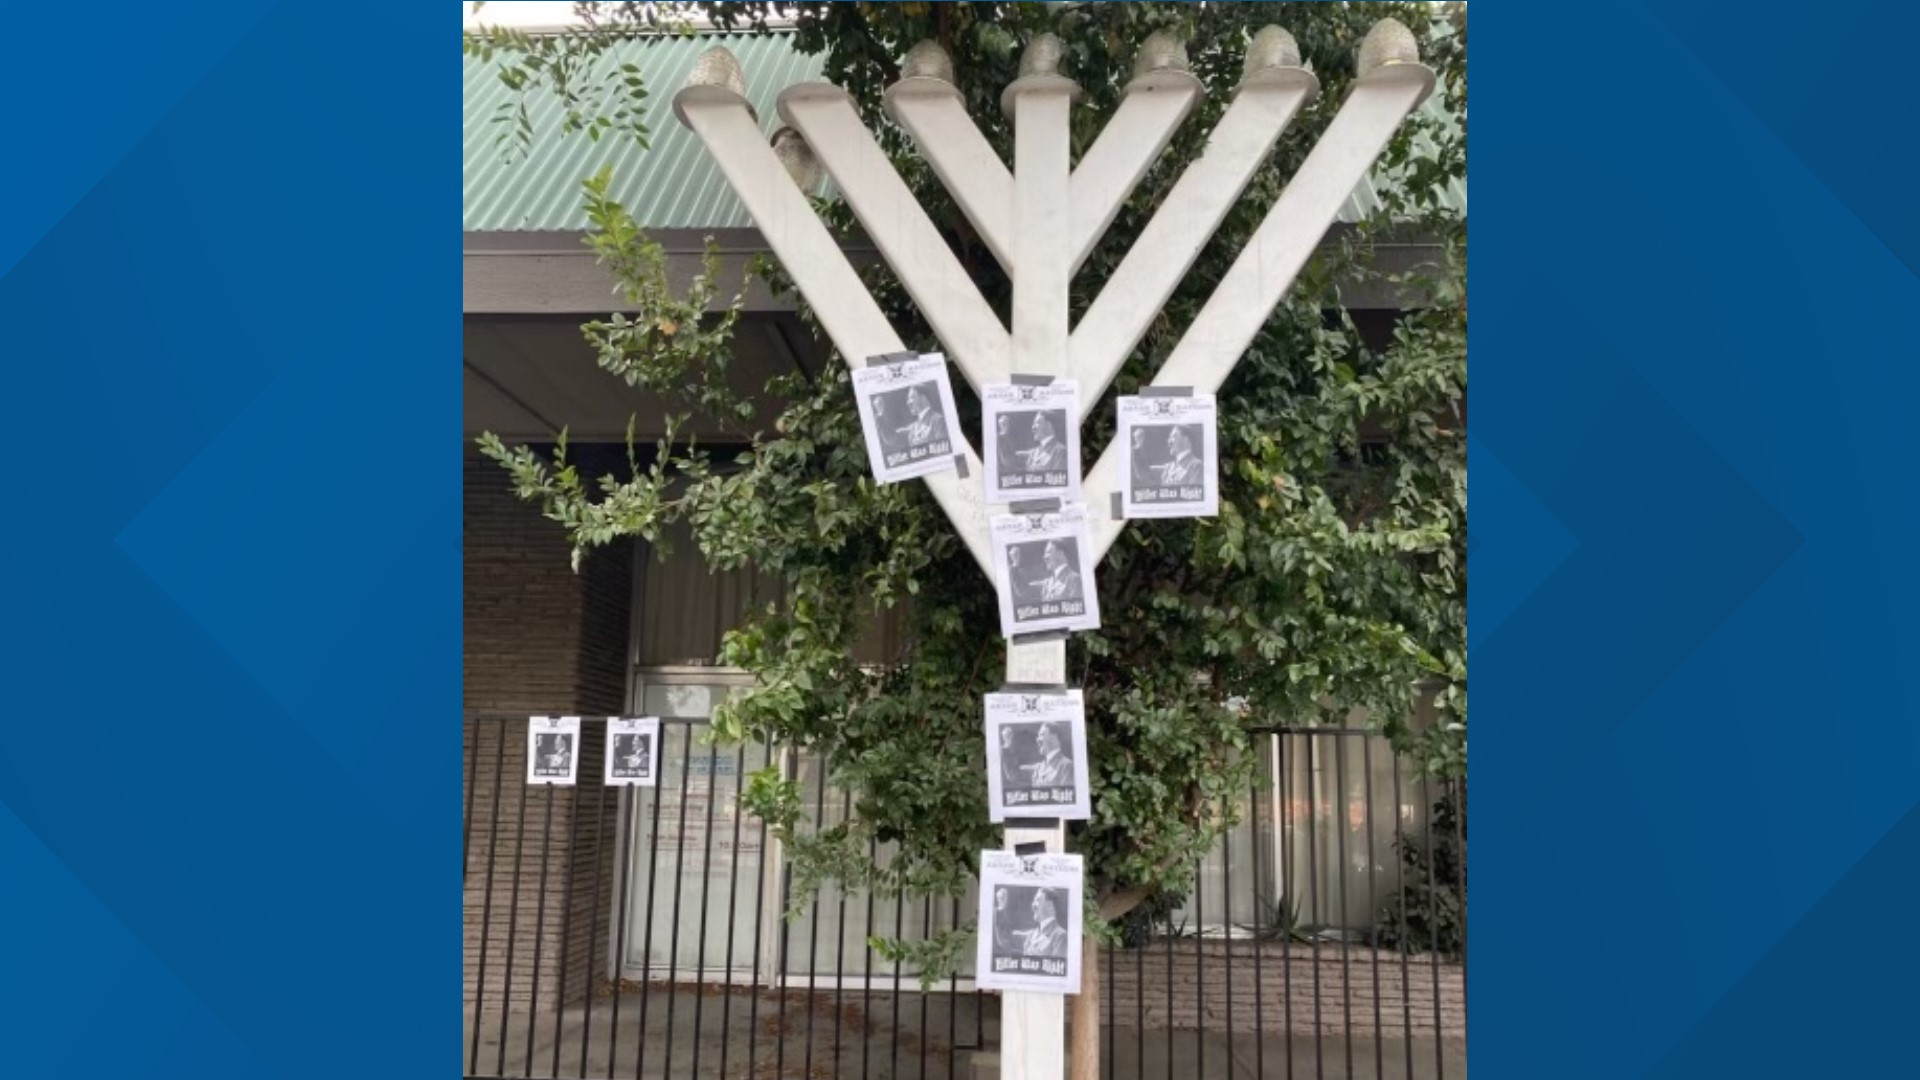 Numerous “Aryan Nation” posters depicting Adolf Hitler were plastered across the front of a menorah and along the front of the small worship center.